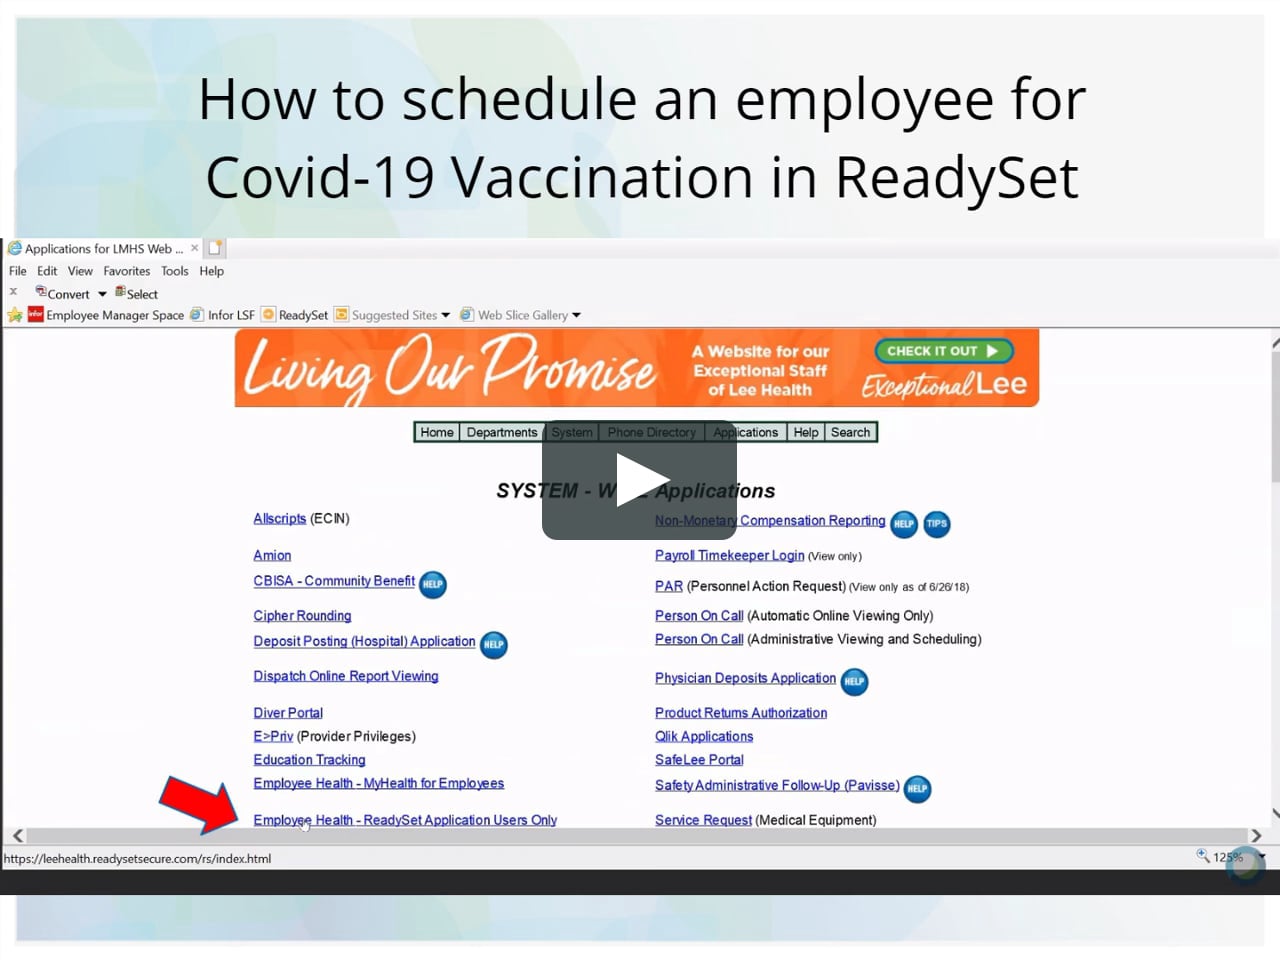 How to Schedule Employees for Covid-19 Vaccination on ReadySet on Vimeo